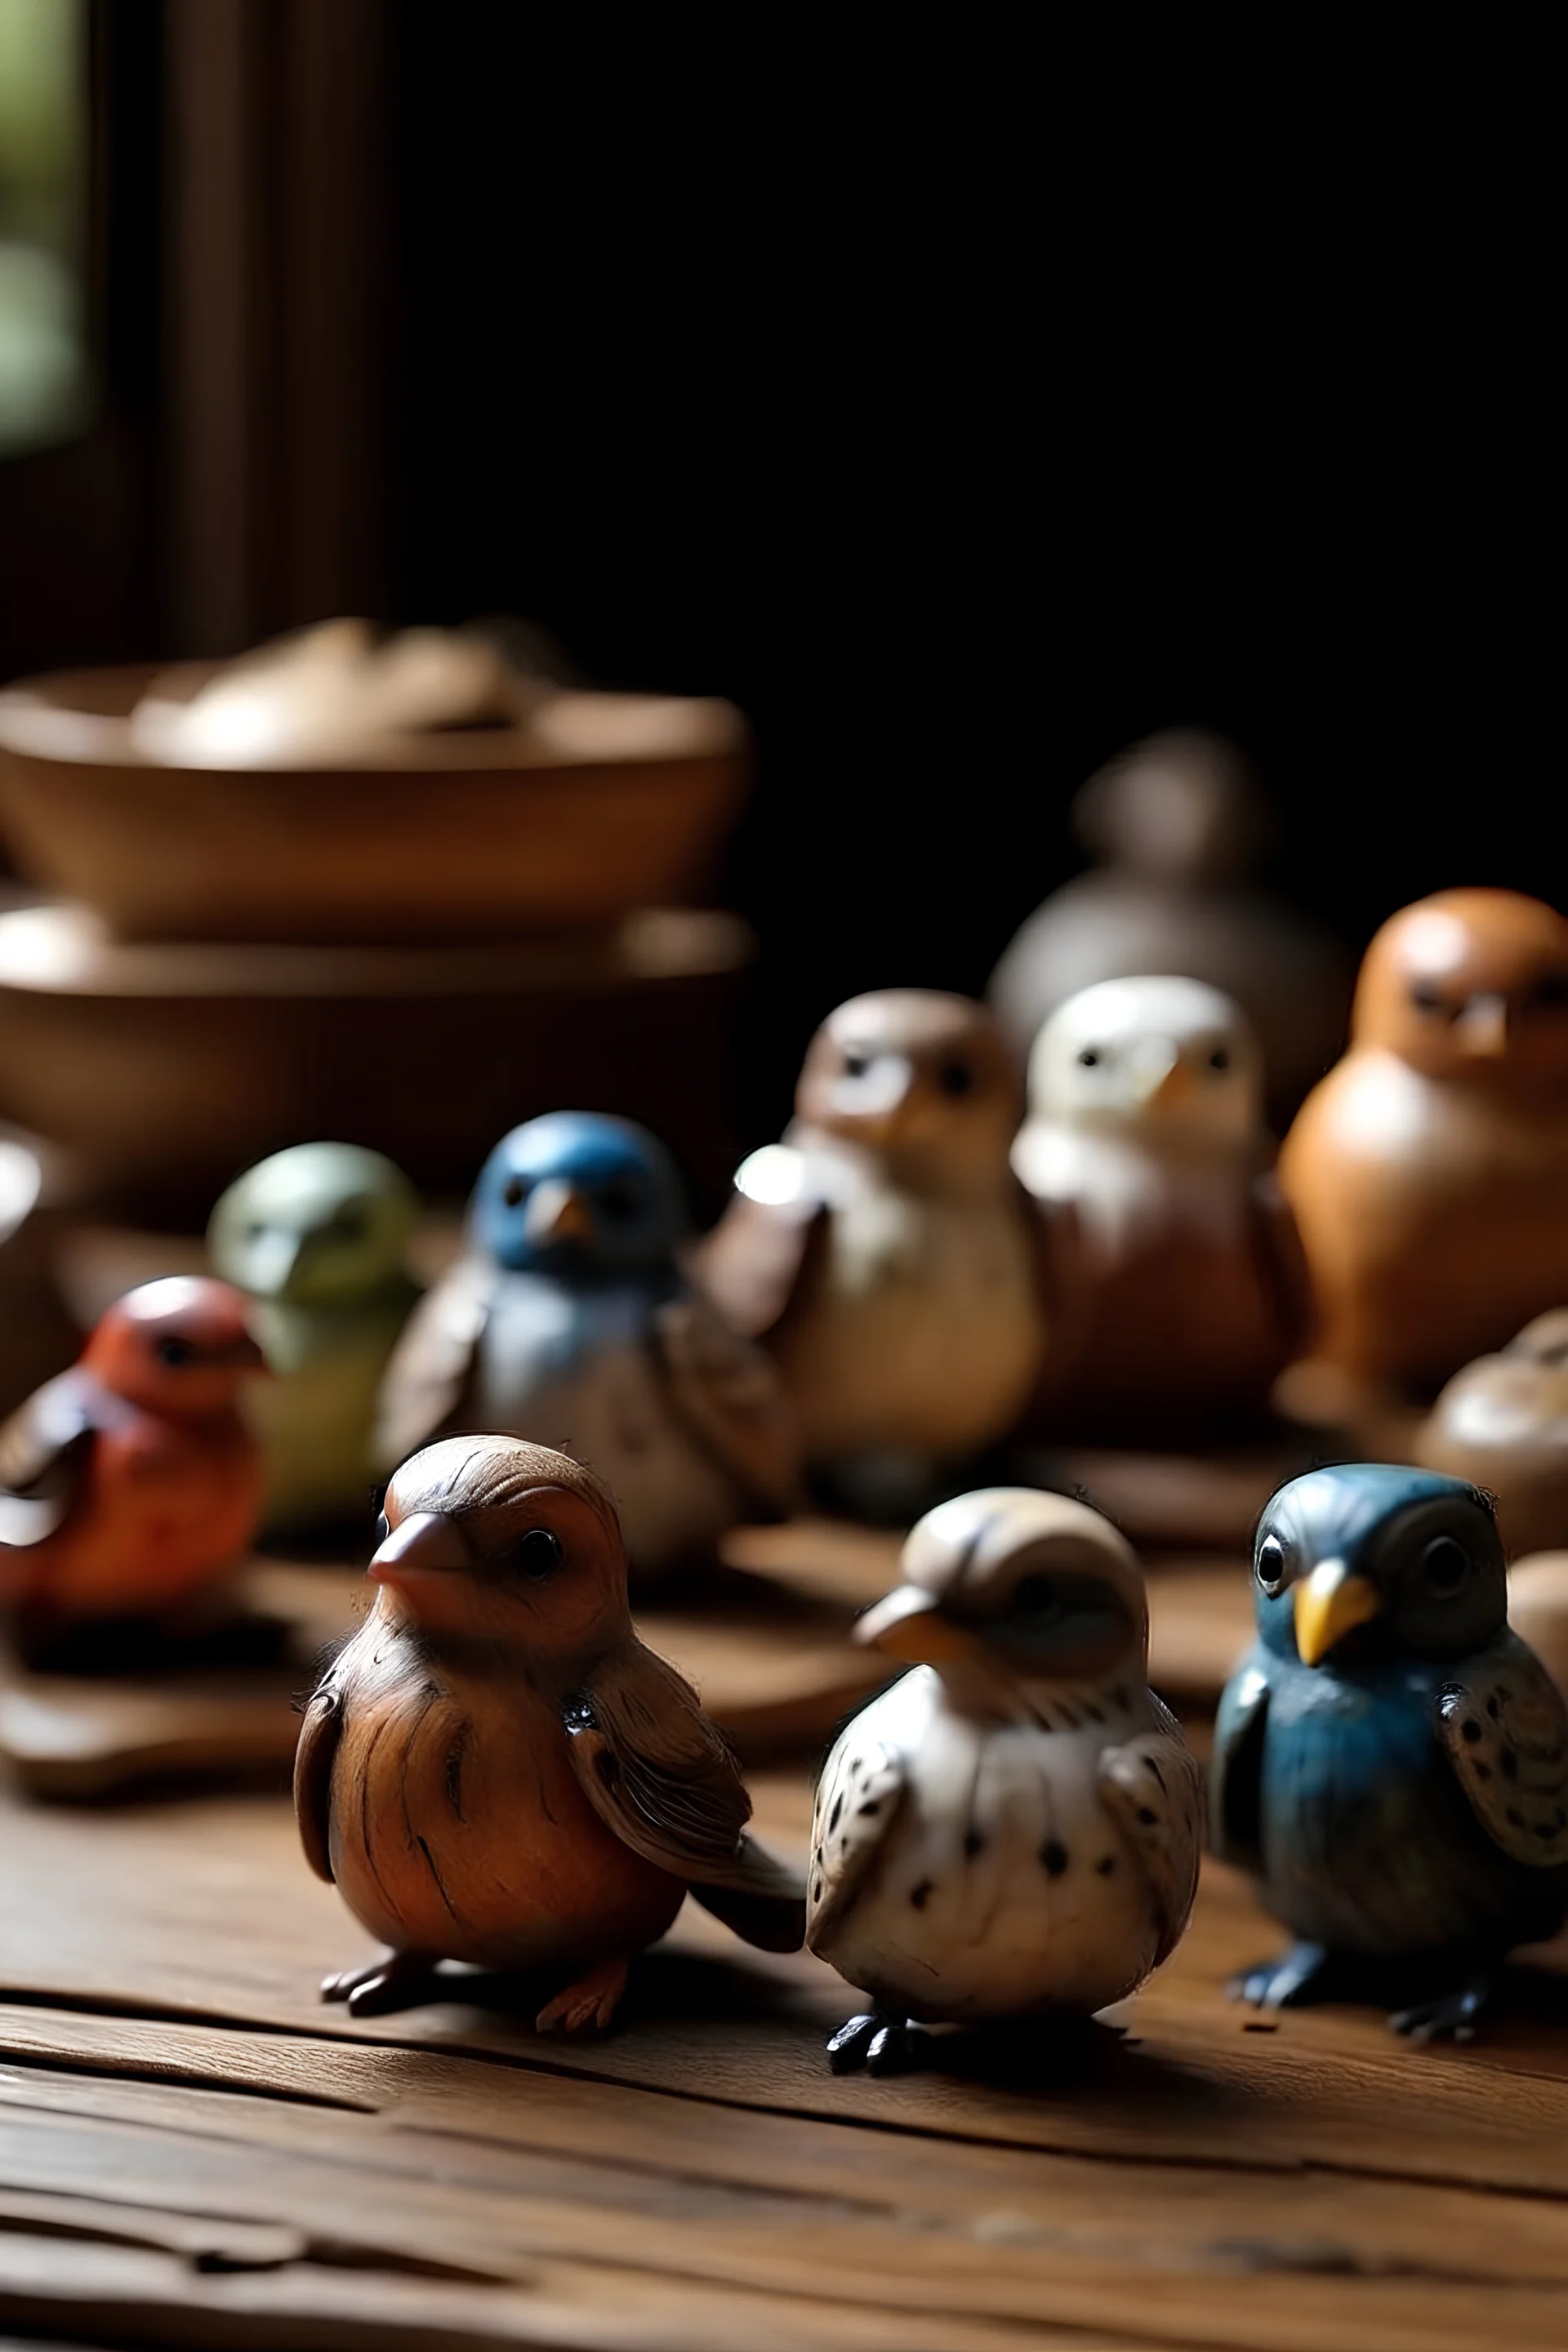 a collection of small cute bird figurines on a wooden surface